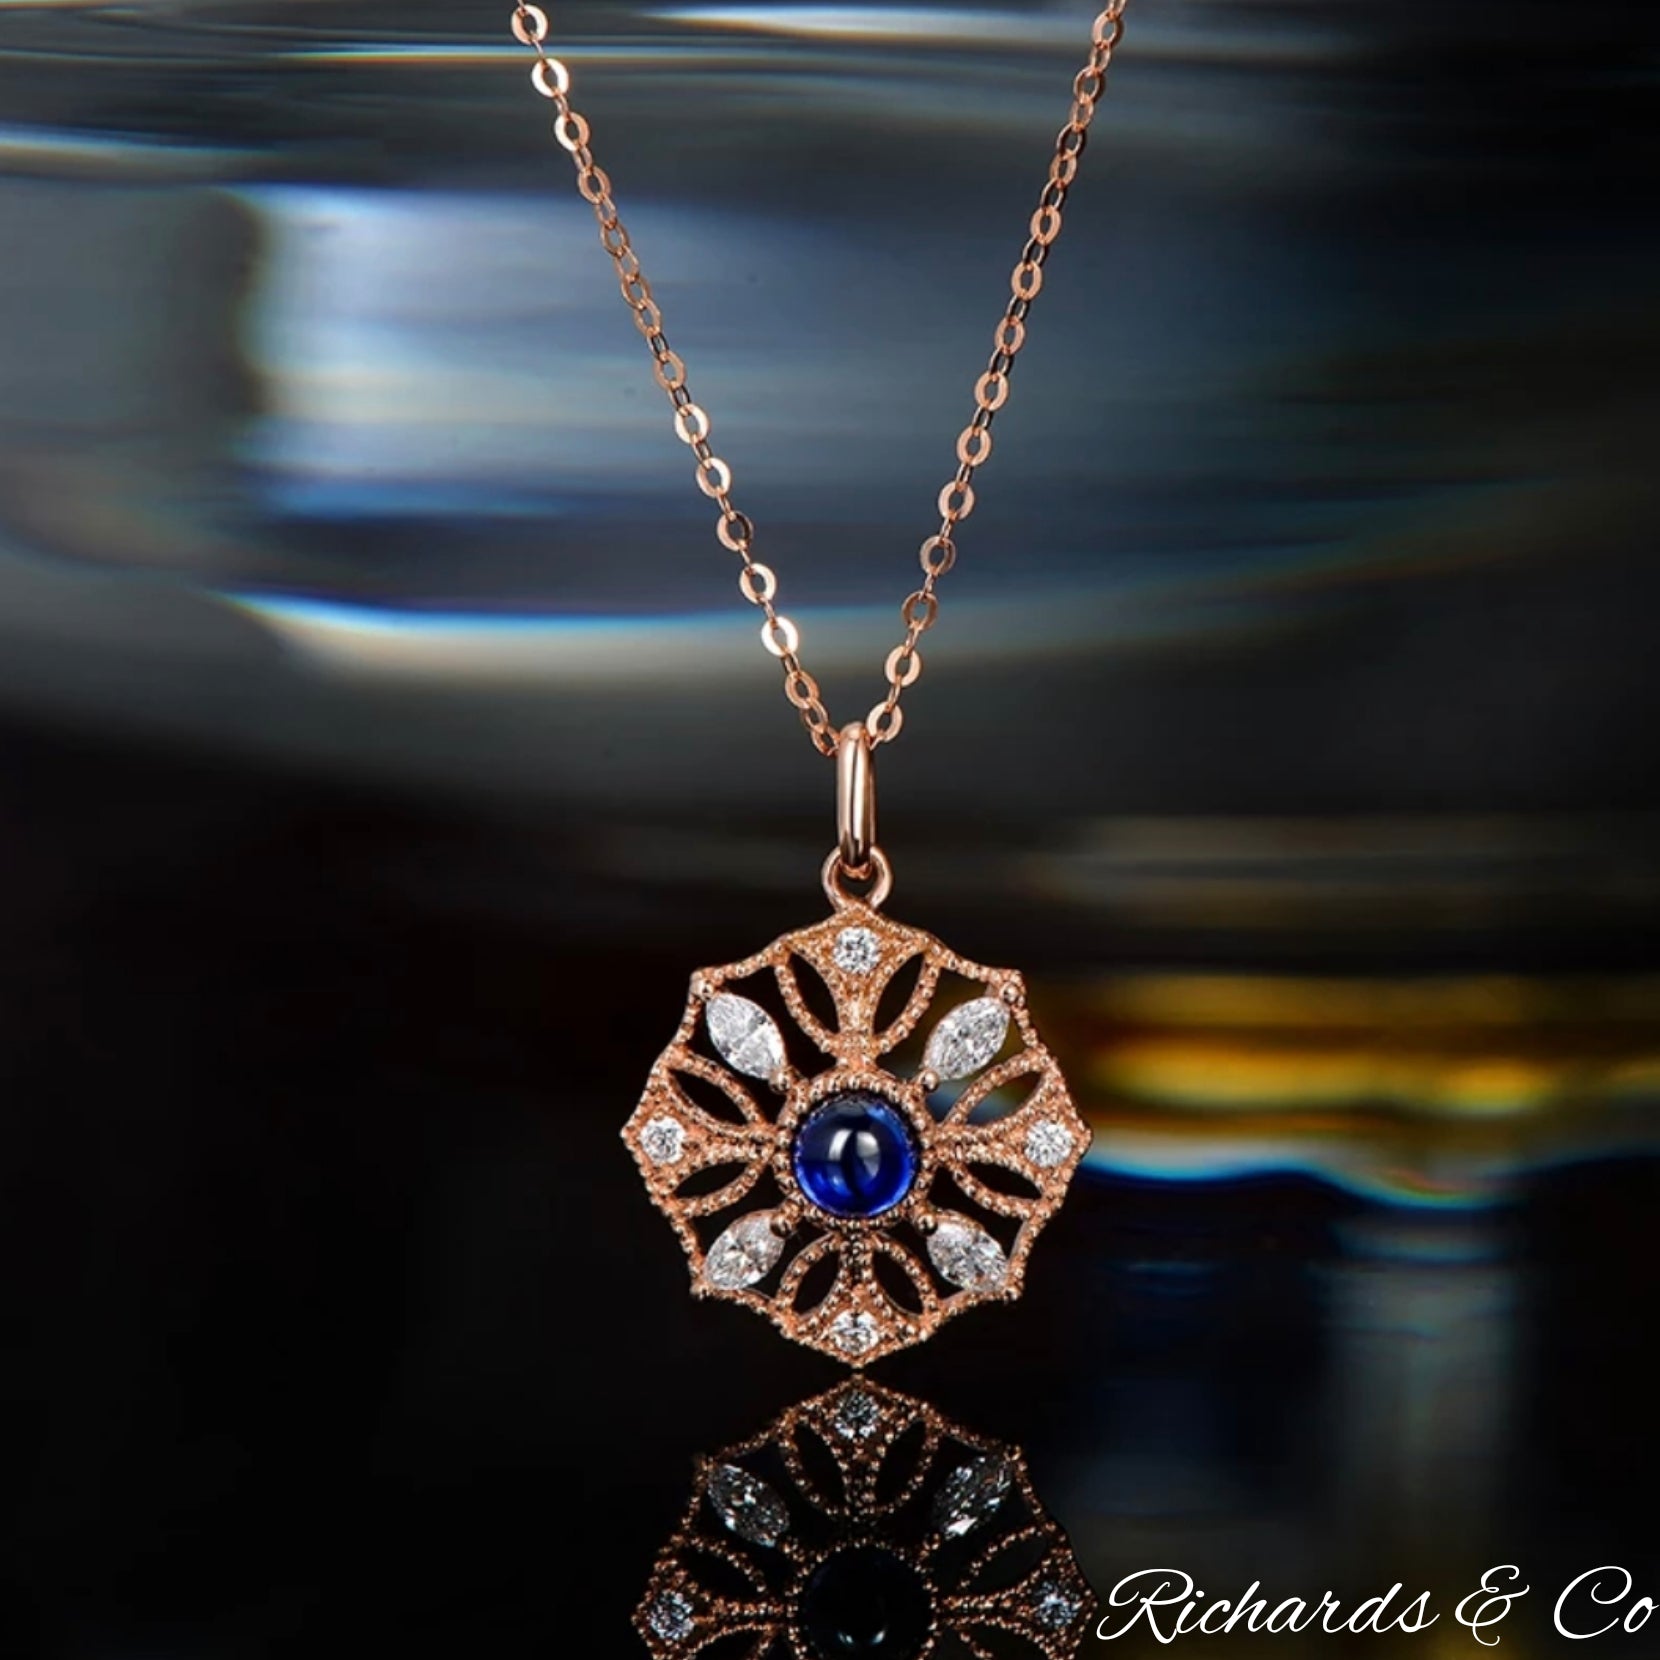 Sapphire Necklace - Richards Gems and Jewelry